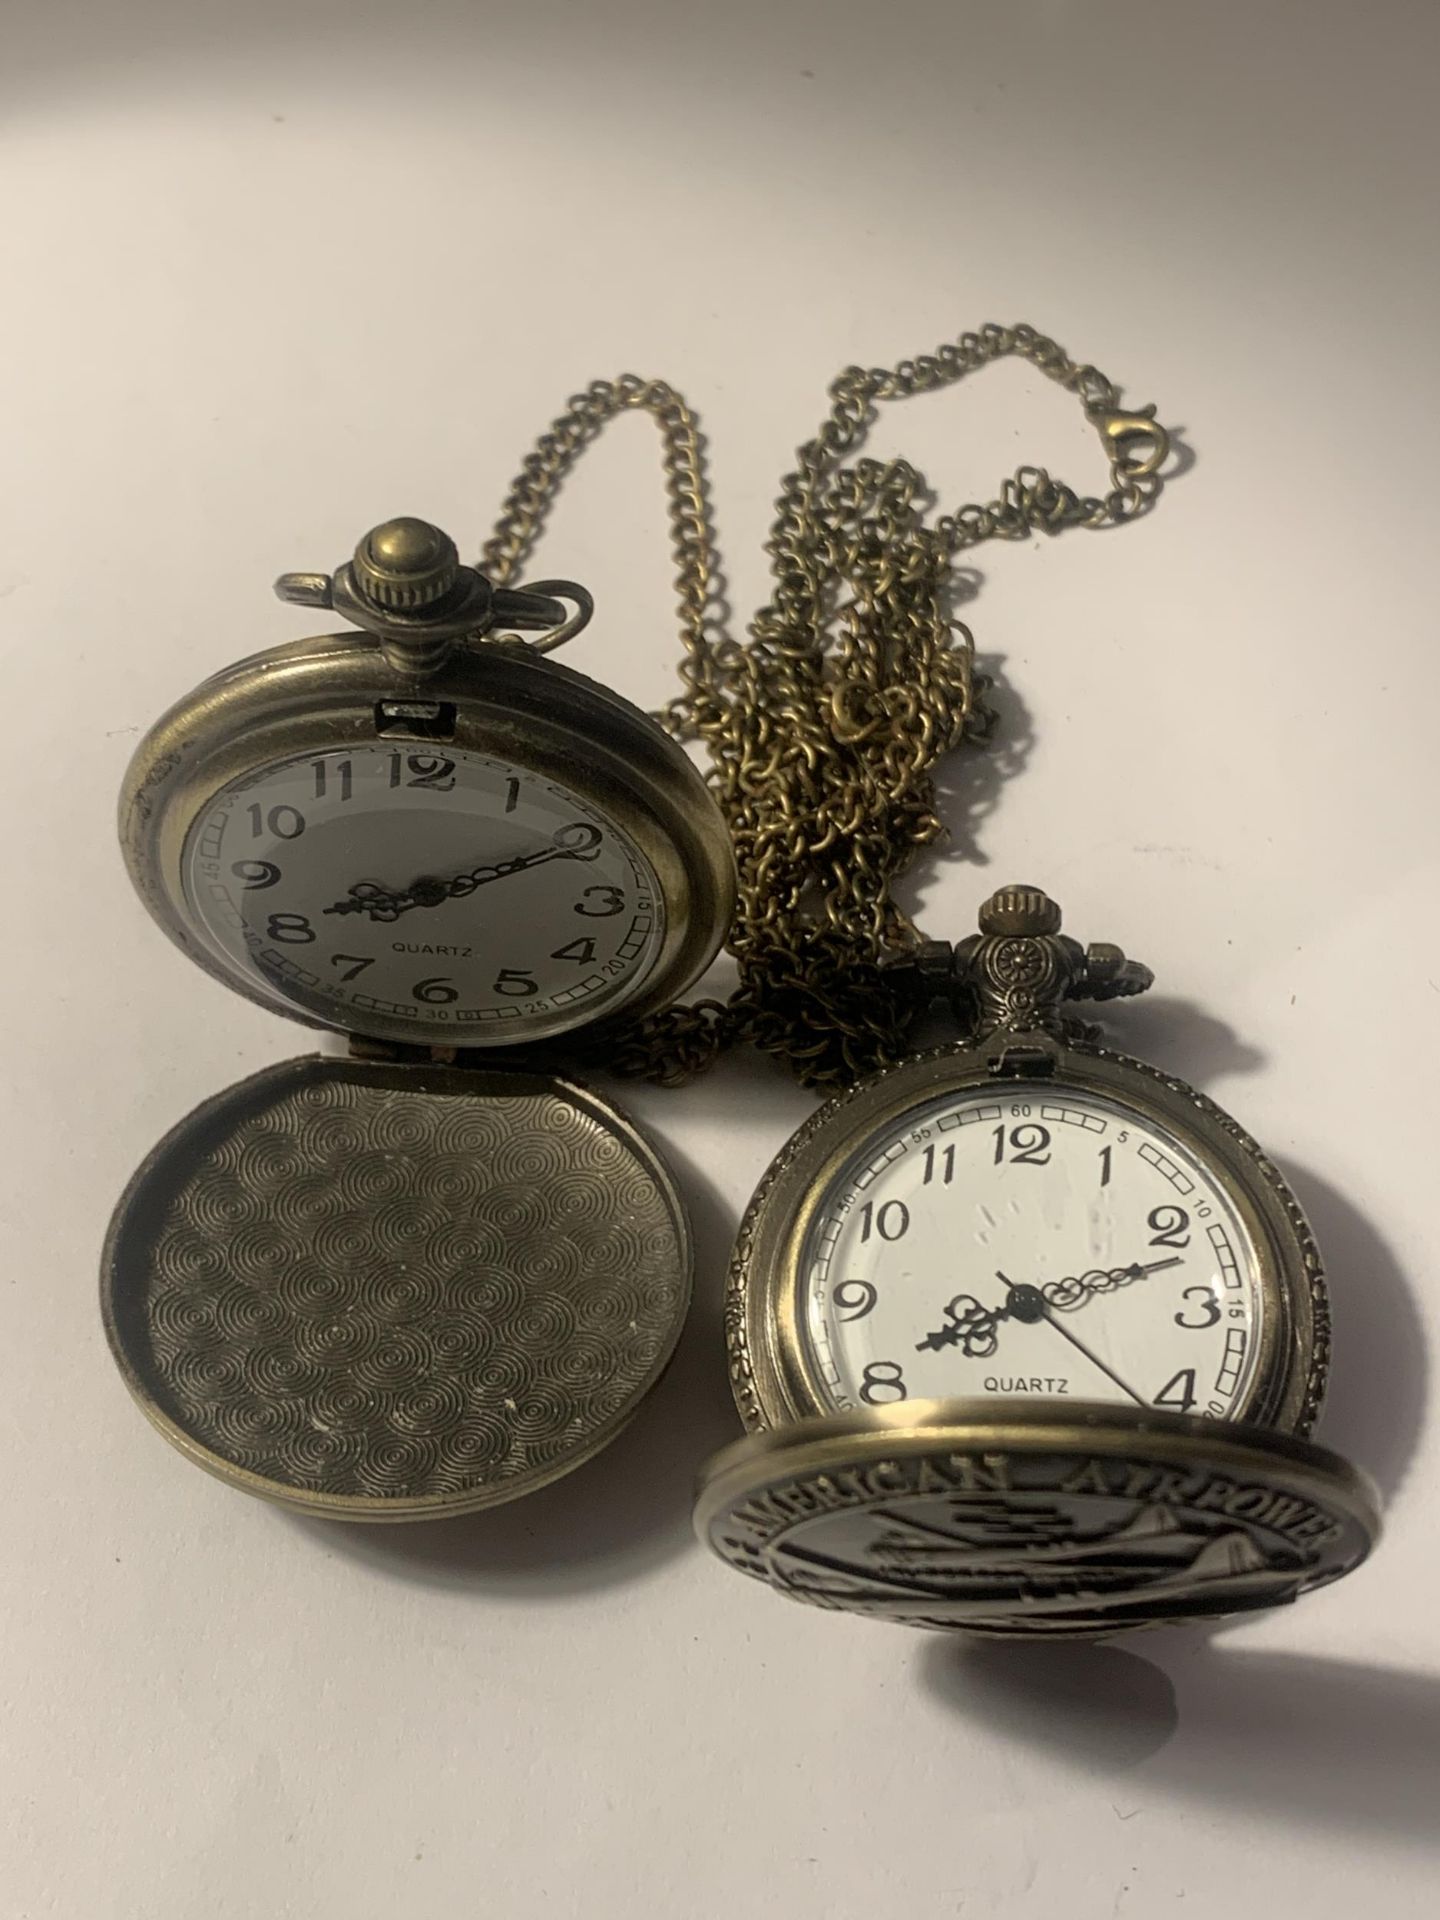 TWO POCKET WATCHES WITH IMAGES OF USA BOMBER AND A COAT OF ARMS - Image 5 of 5